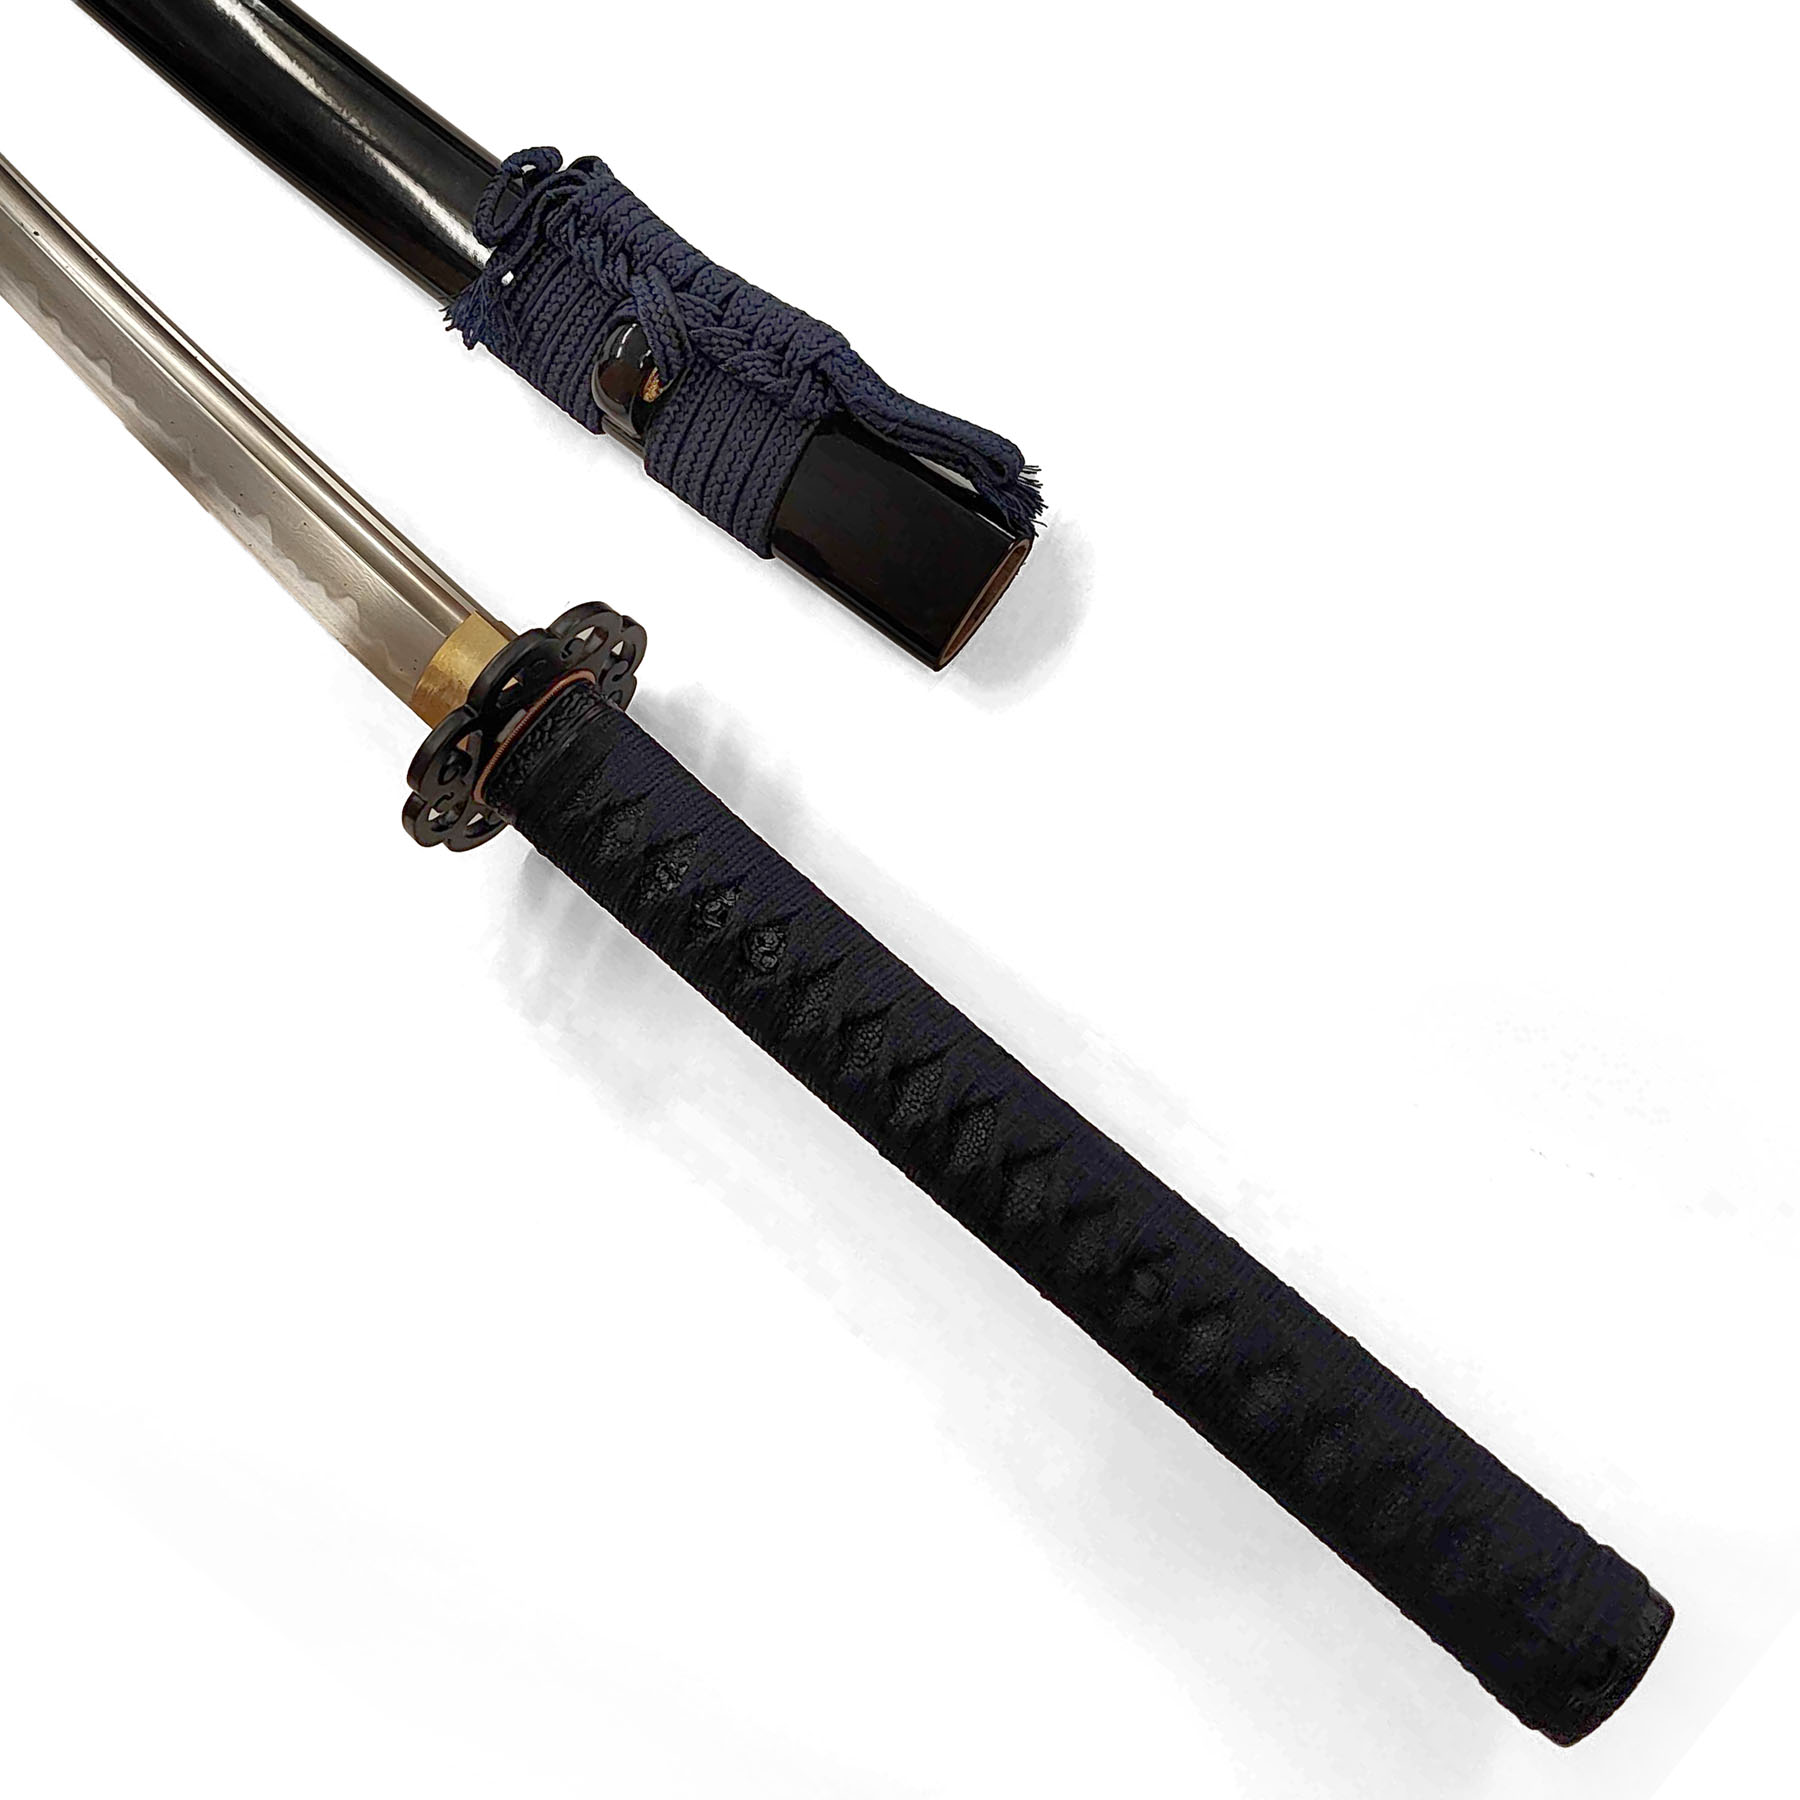 Imperial Forge - Katana folded Steel competition cutting